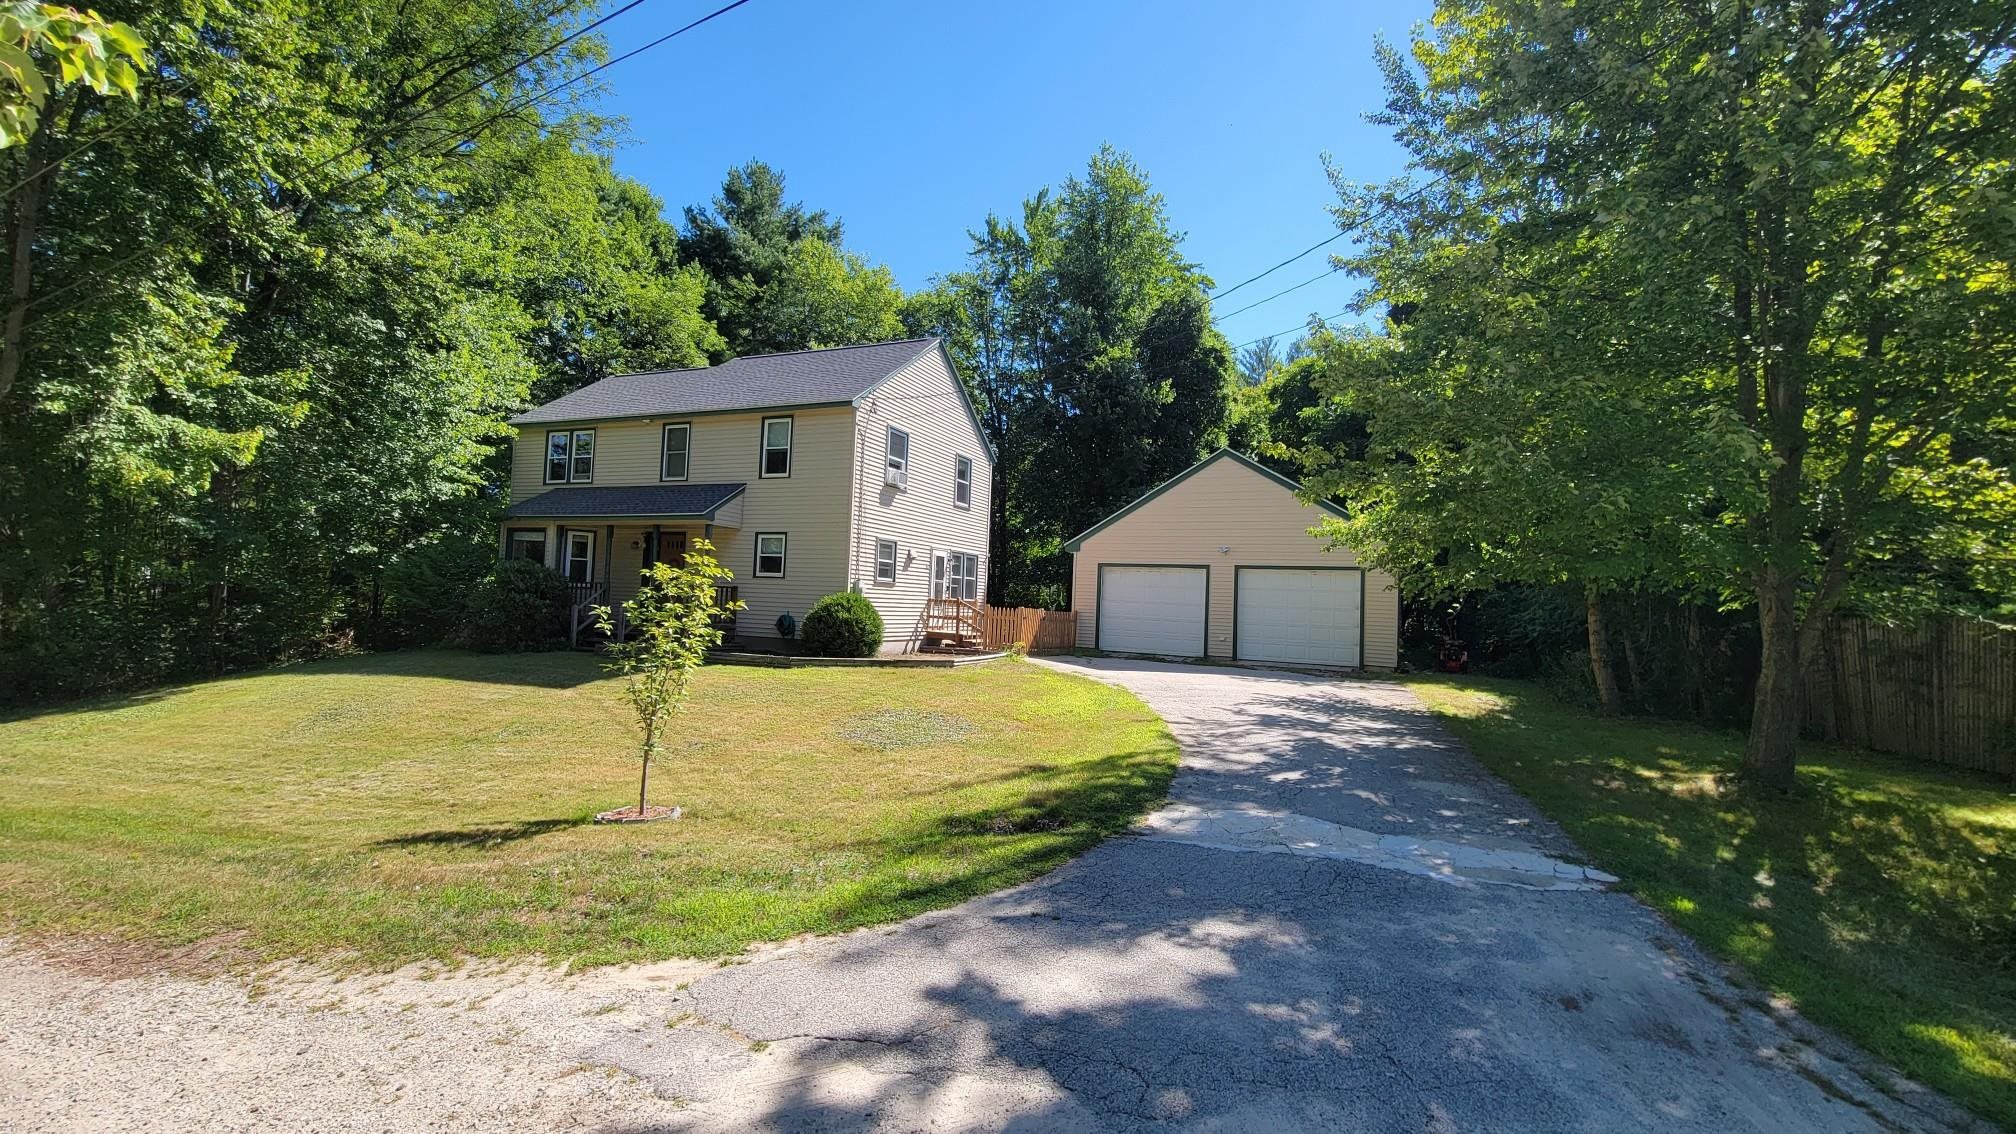 Photo of 33 River Road Allenstown NH 03275